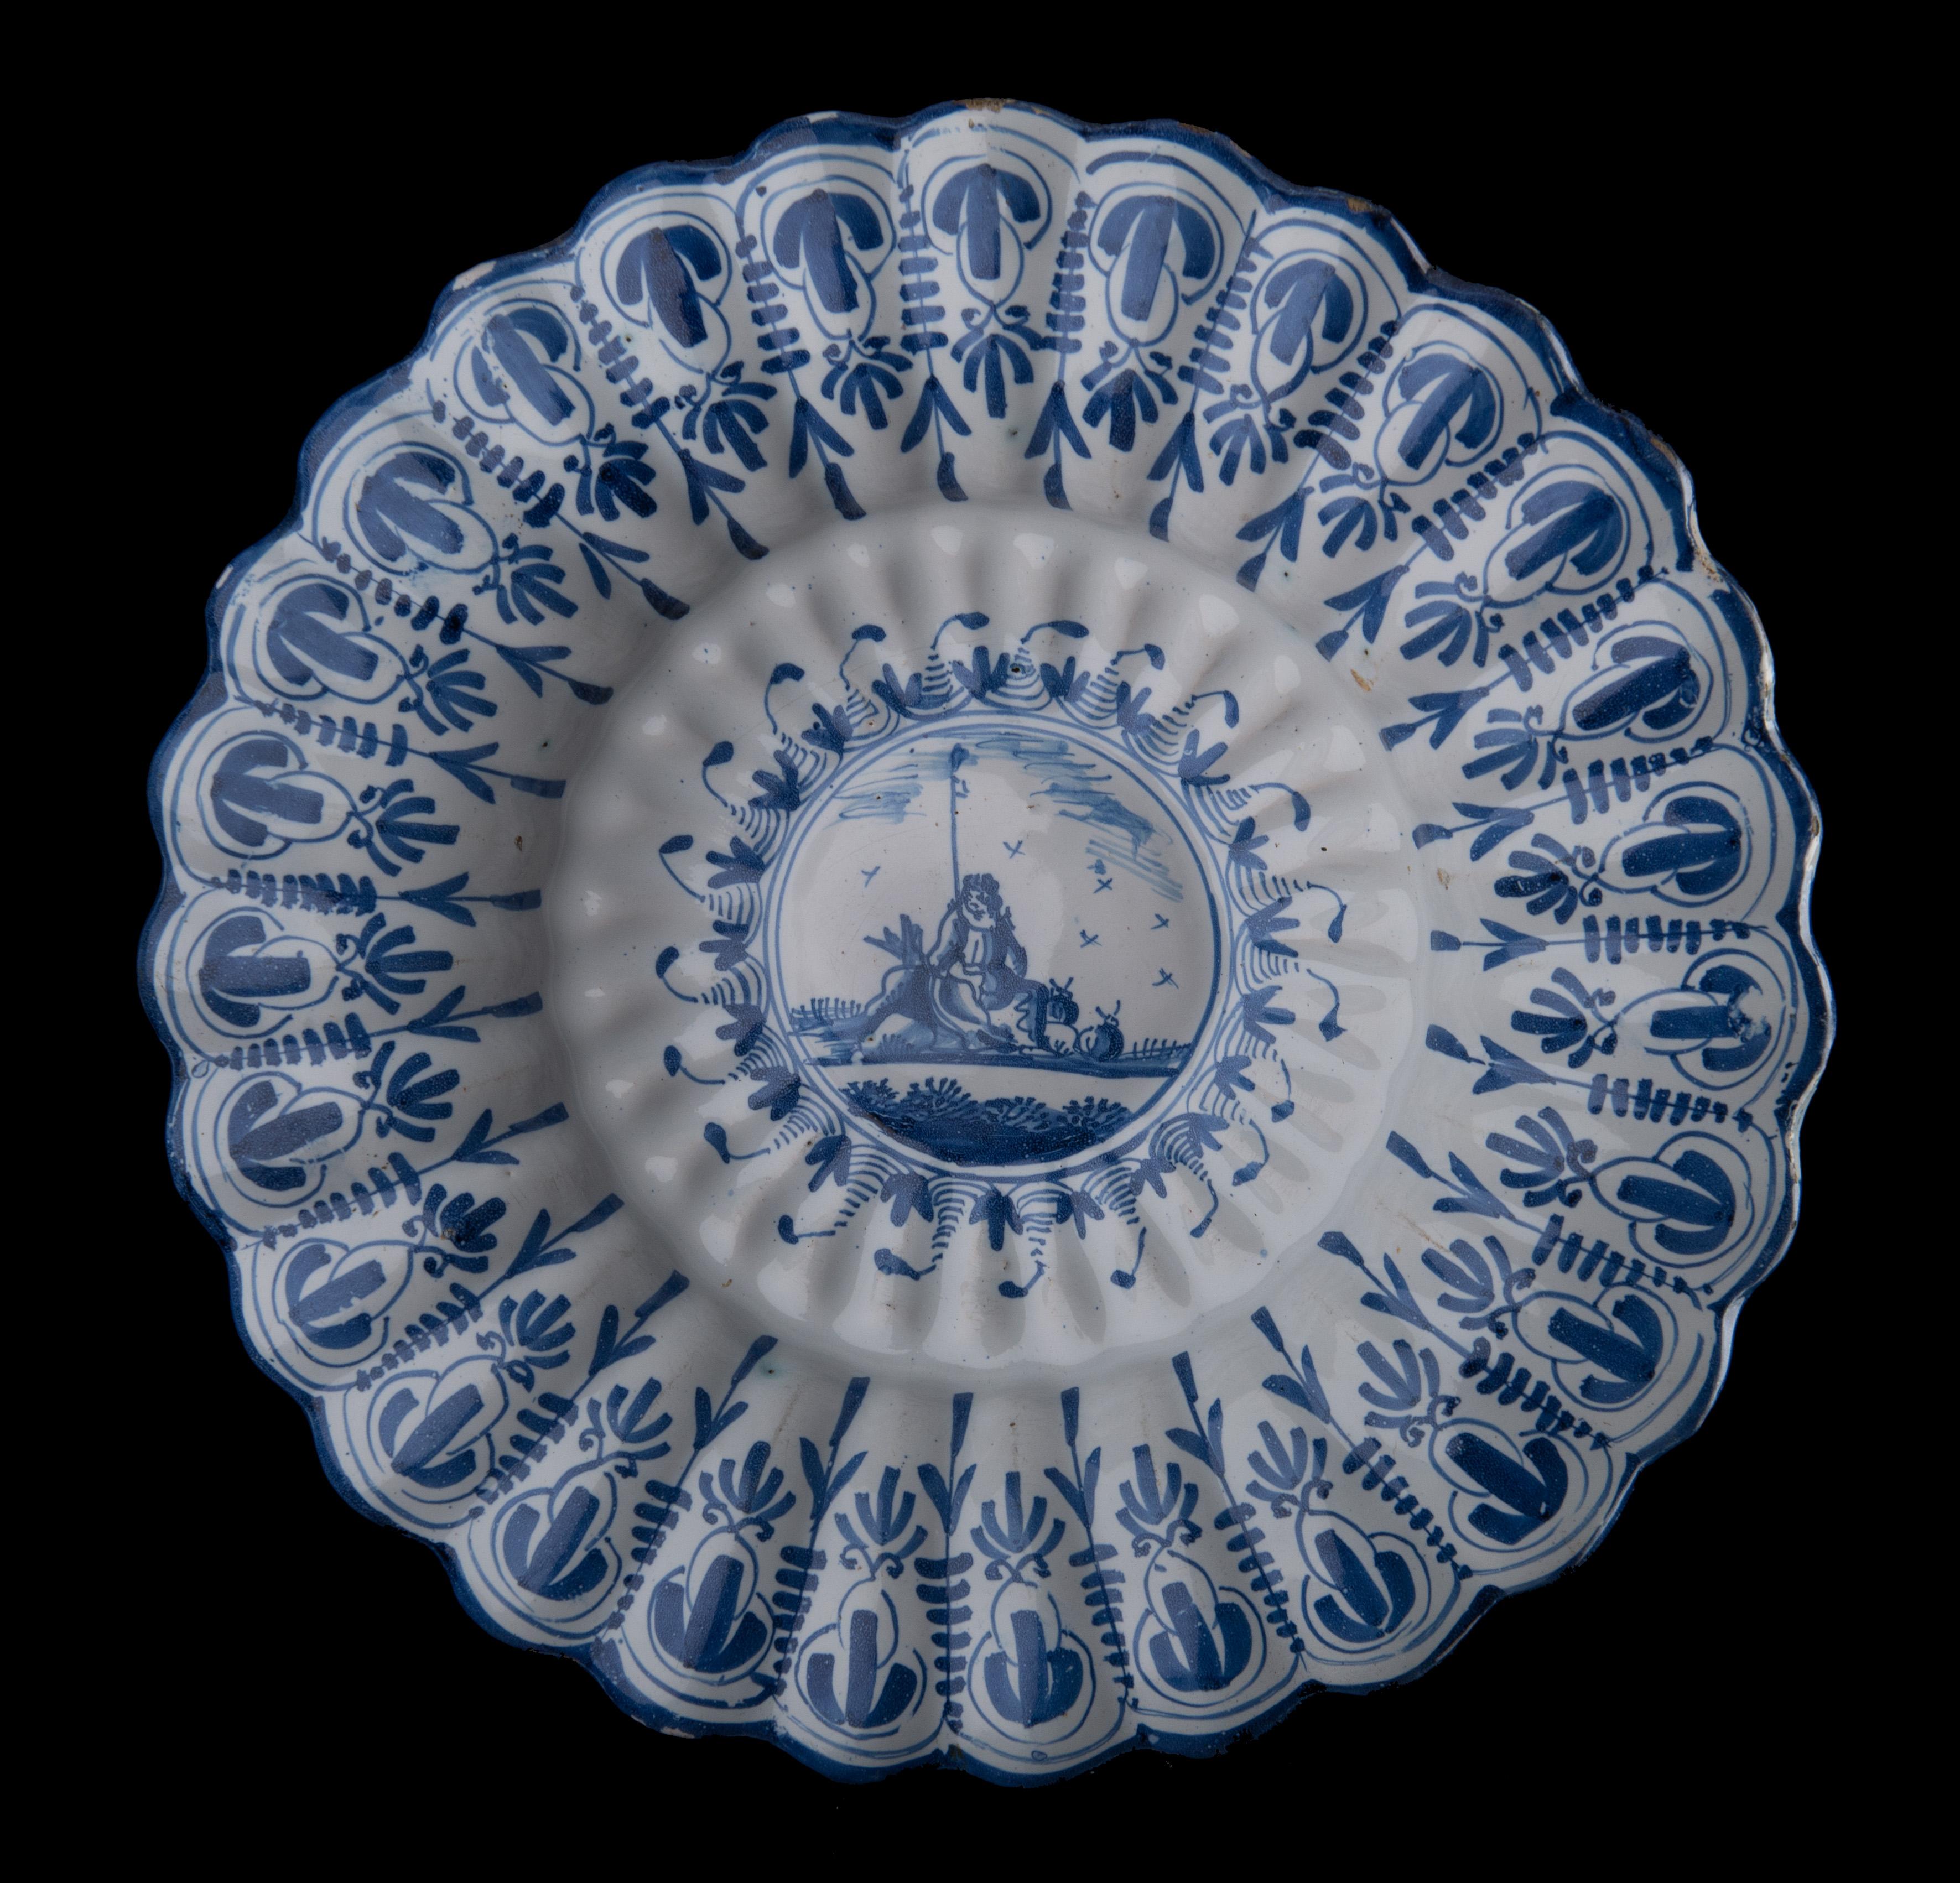 Blue and white lobed dish with shepherd. Northern Netherlands, 1650-1680. 
Dimensions: diameter 33,5 cm / 13.18 in. 

The blue and white dish is composed of twenty-seven double lobes around a curved center. It is painted with a shepherd holding a